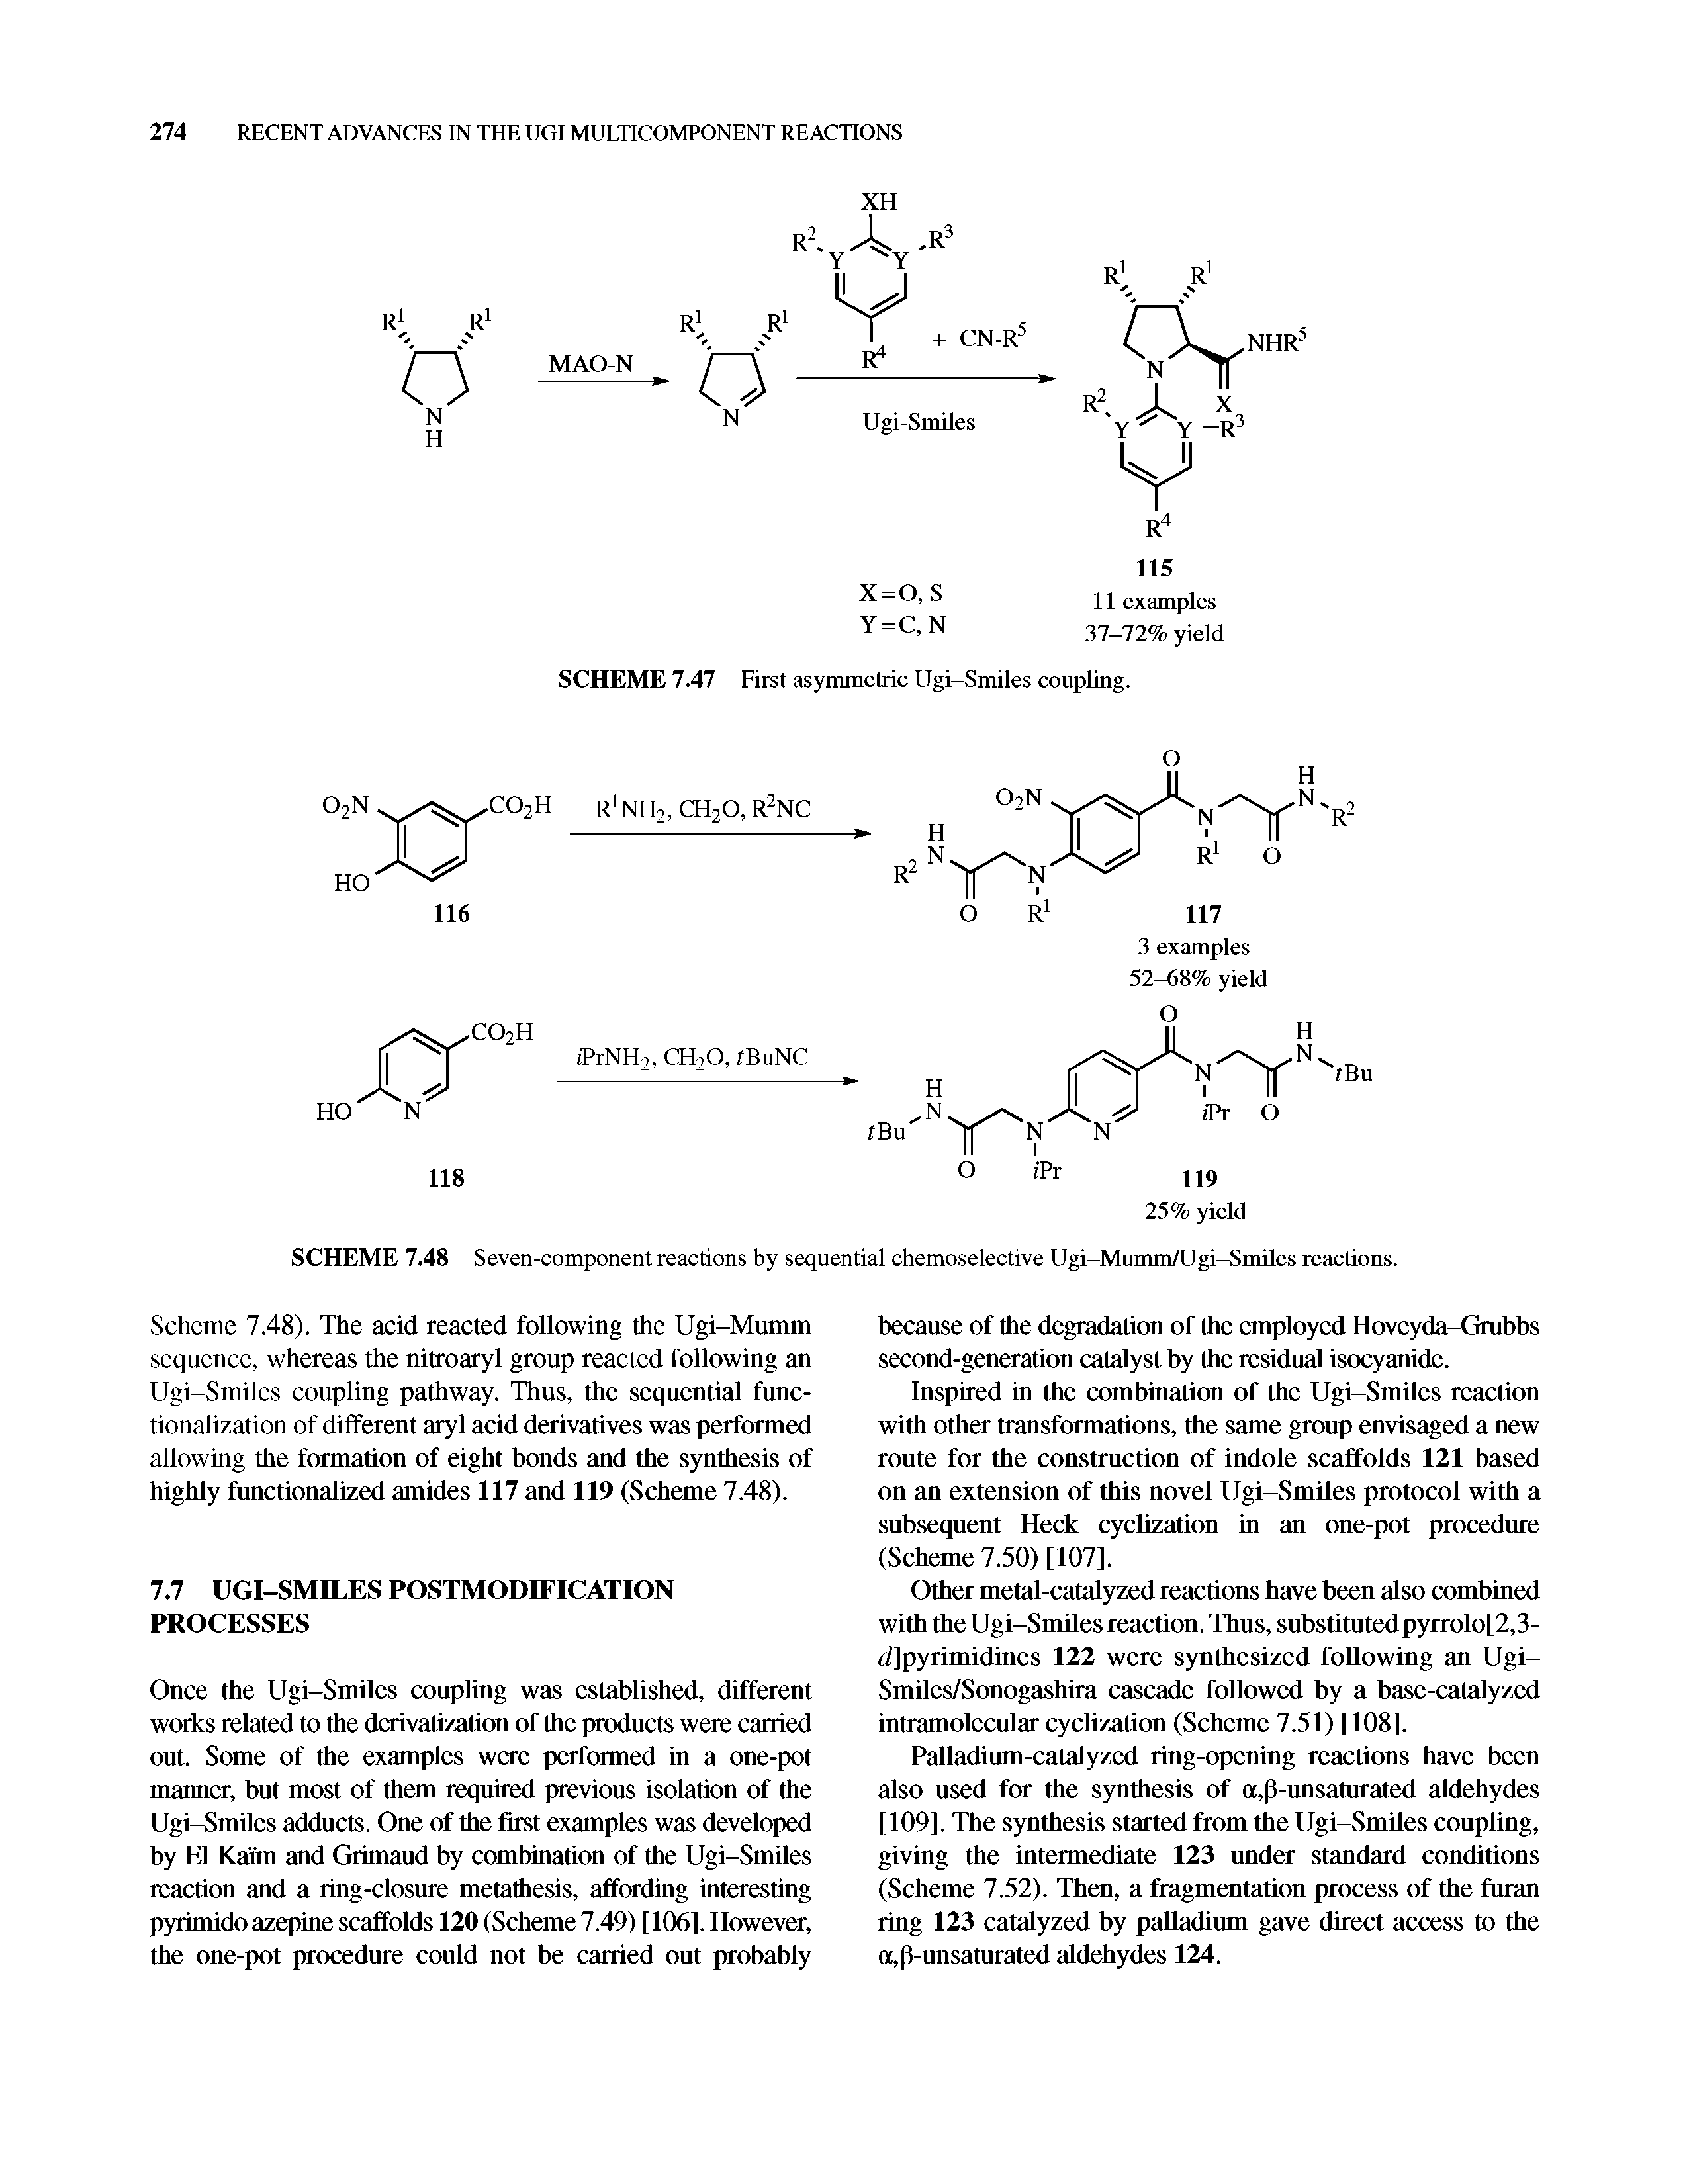 Scheme 7.48). The acid reacted following the Ugi-Mumm sequence, whereas the nitroaryl group reacted following an Ugi-Smiles coupling pathway. Thus, the sequential functionalization of different aryl acid derivatives was performed allowing the formation of eight bonds and the synthesis of highly functionalized amides 117 and 119 (Scheme 7.48).